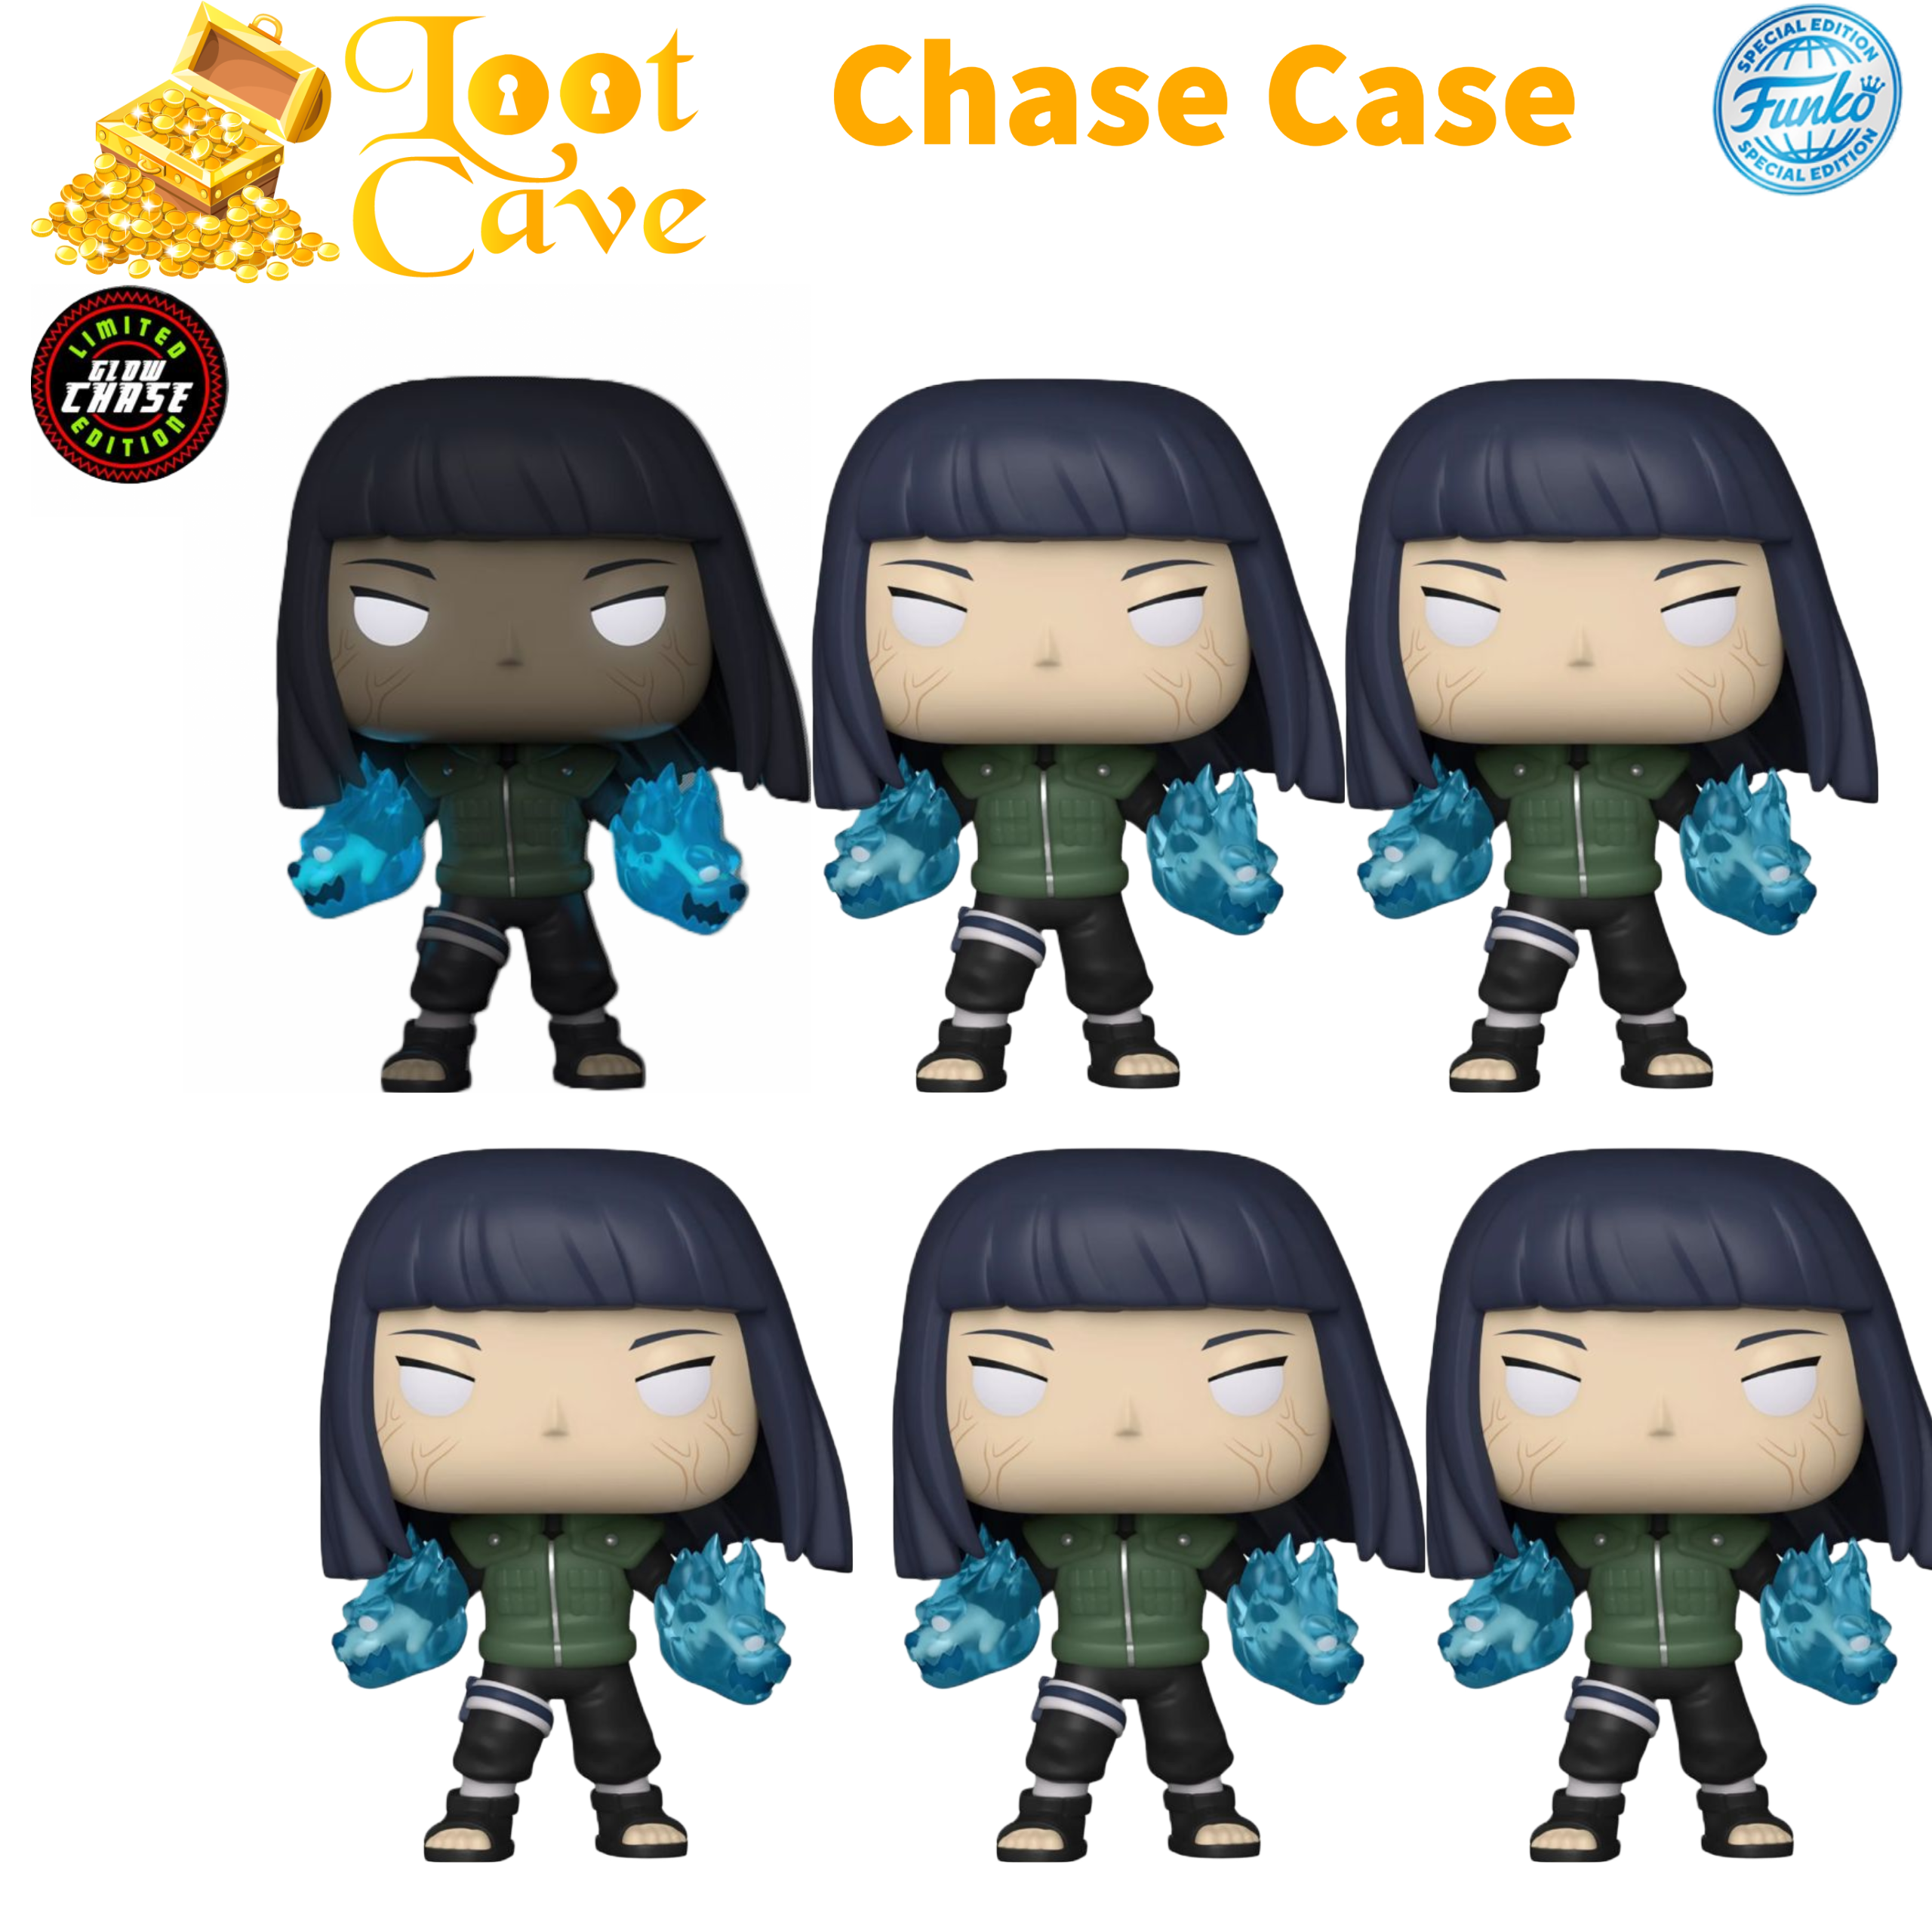 Naruto - Hinata with Twin Lion Fists US Exclusive Pop! Vinyl [RS] (Cha –  Loot Cave